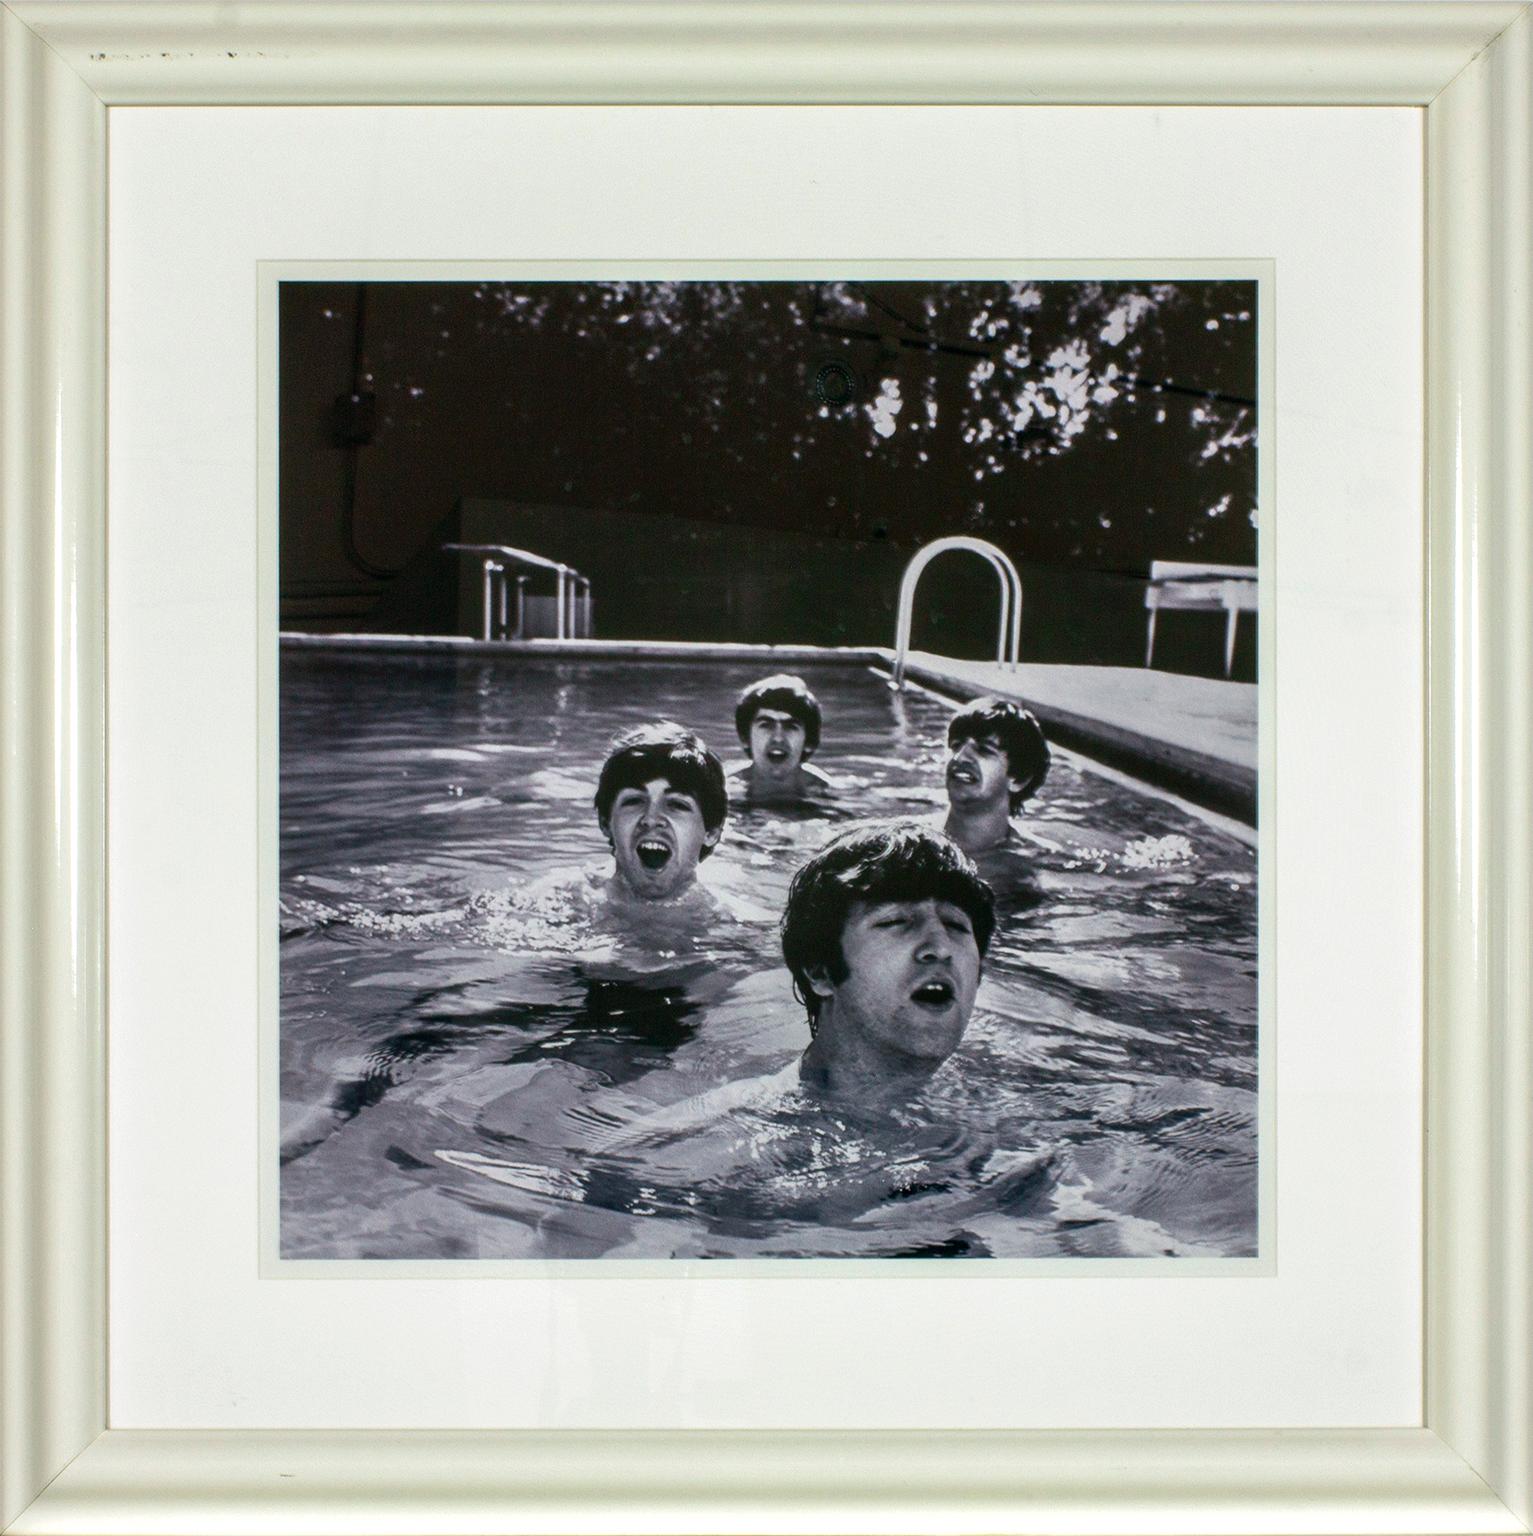 "The Beatles, Miami Beach, 1964" by photographer John Loengard depicts Paul McCartney, George Harrison, Ringo Starr and John Lennon treading water in the swimming pool of the Deauville Hotel in Miami Beach, Florida, in February 1964. This framed